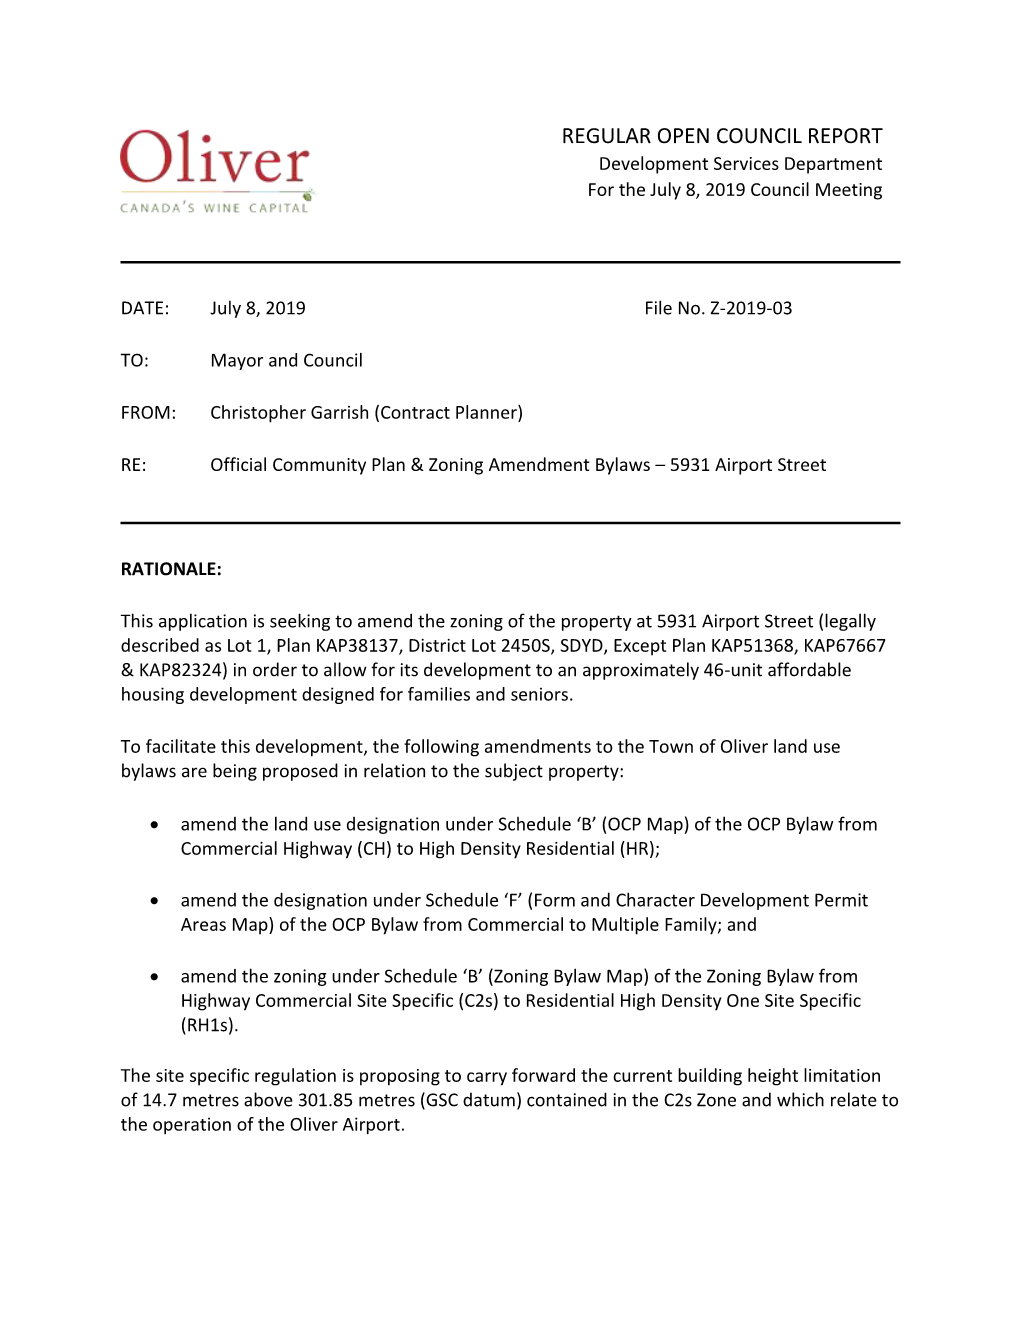 REGULAR OPEN COUNCIL REPORT Development Services Department for the July 8, 2019 Council Meeting